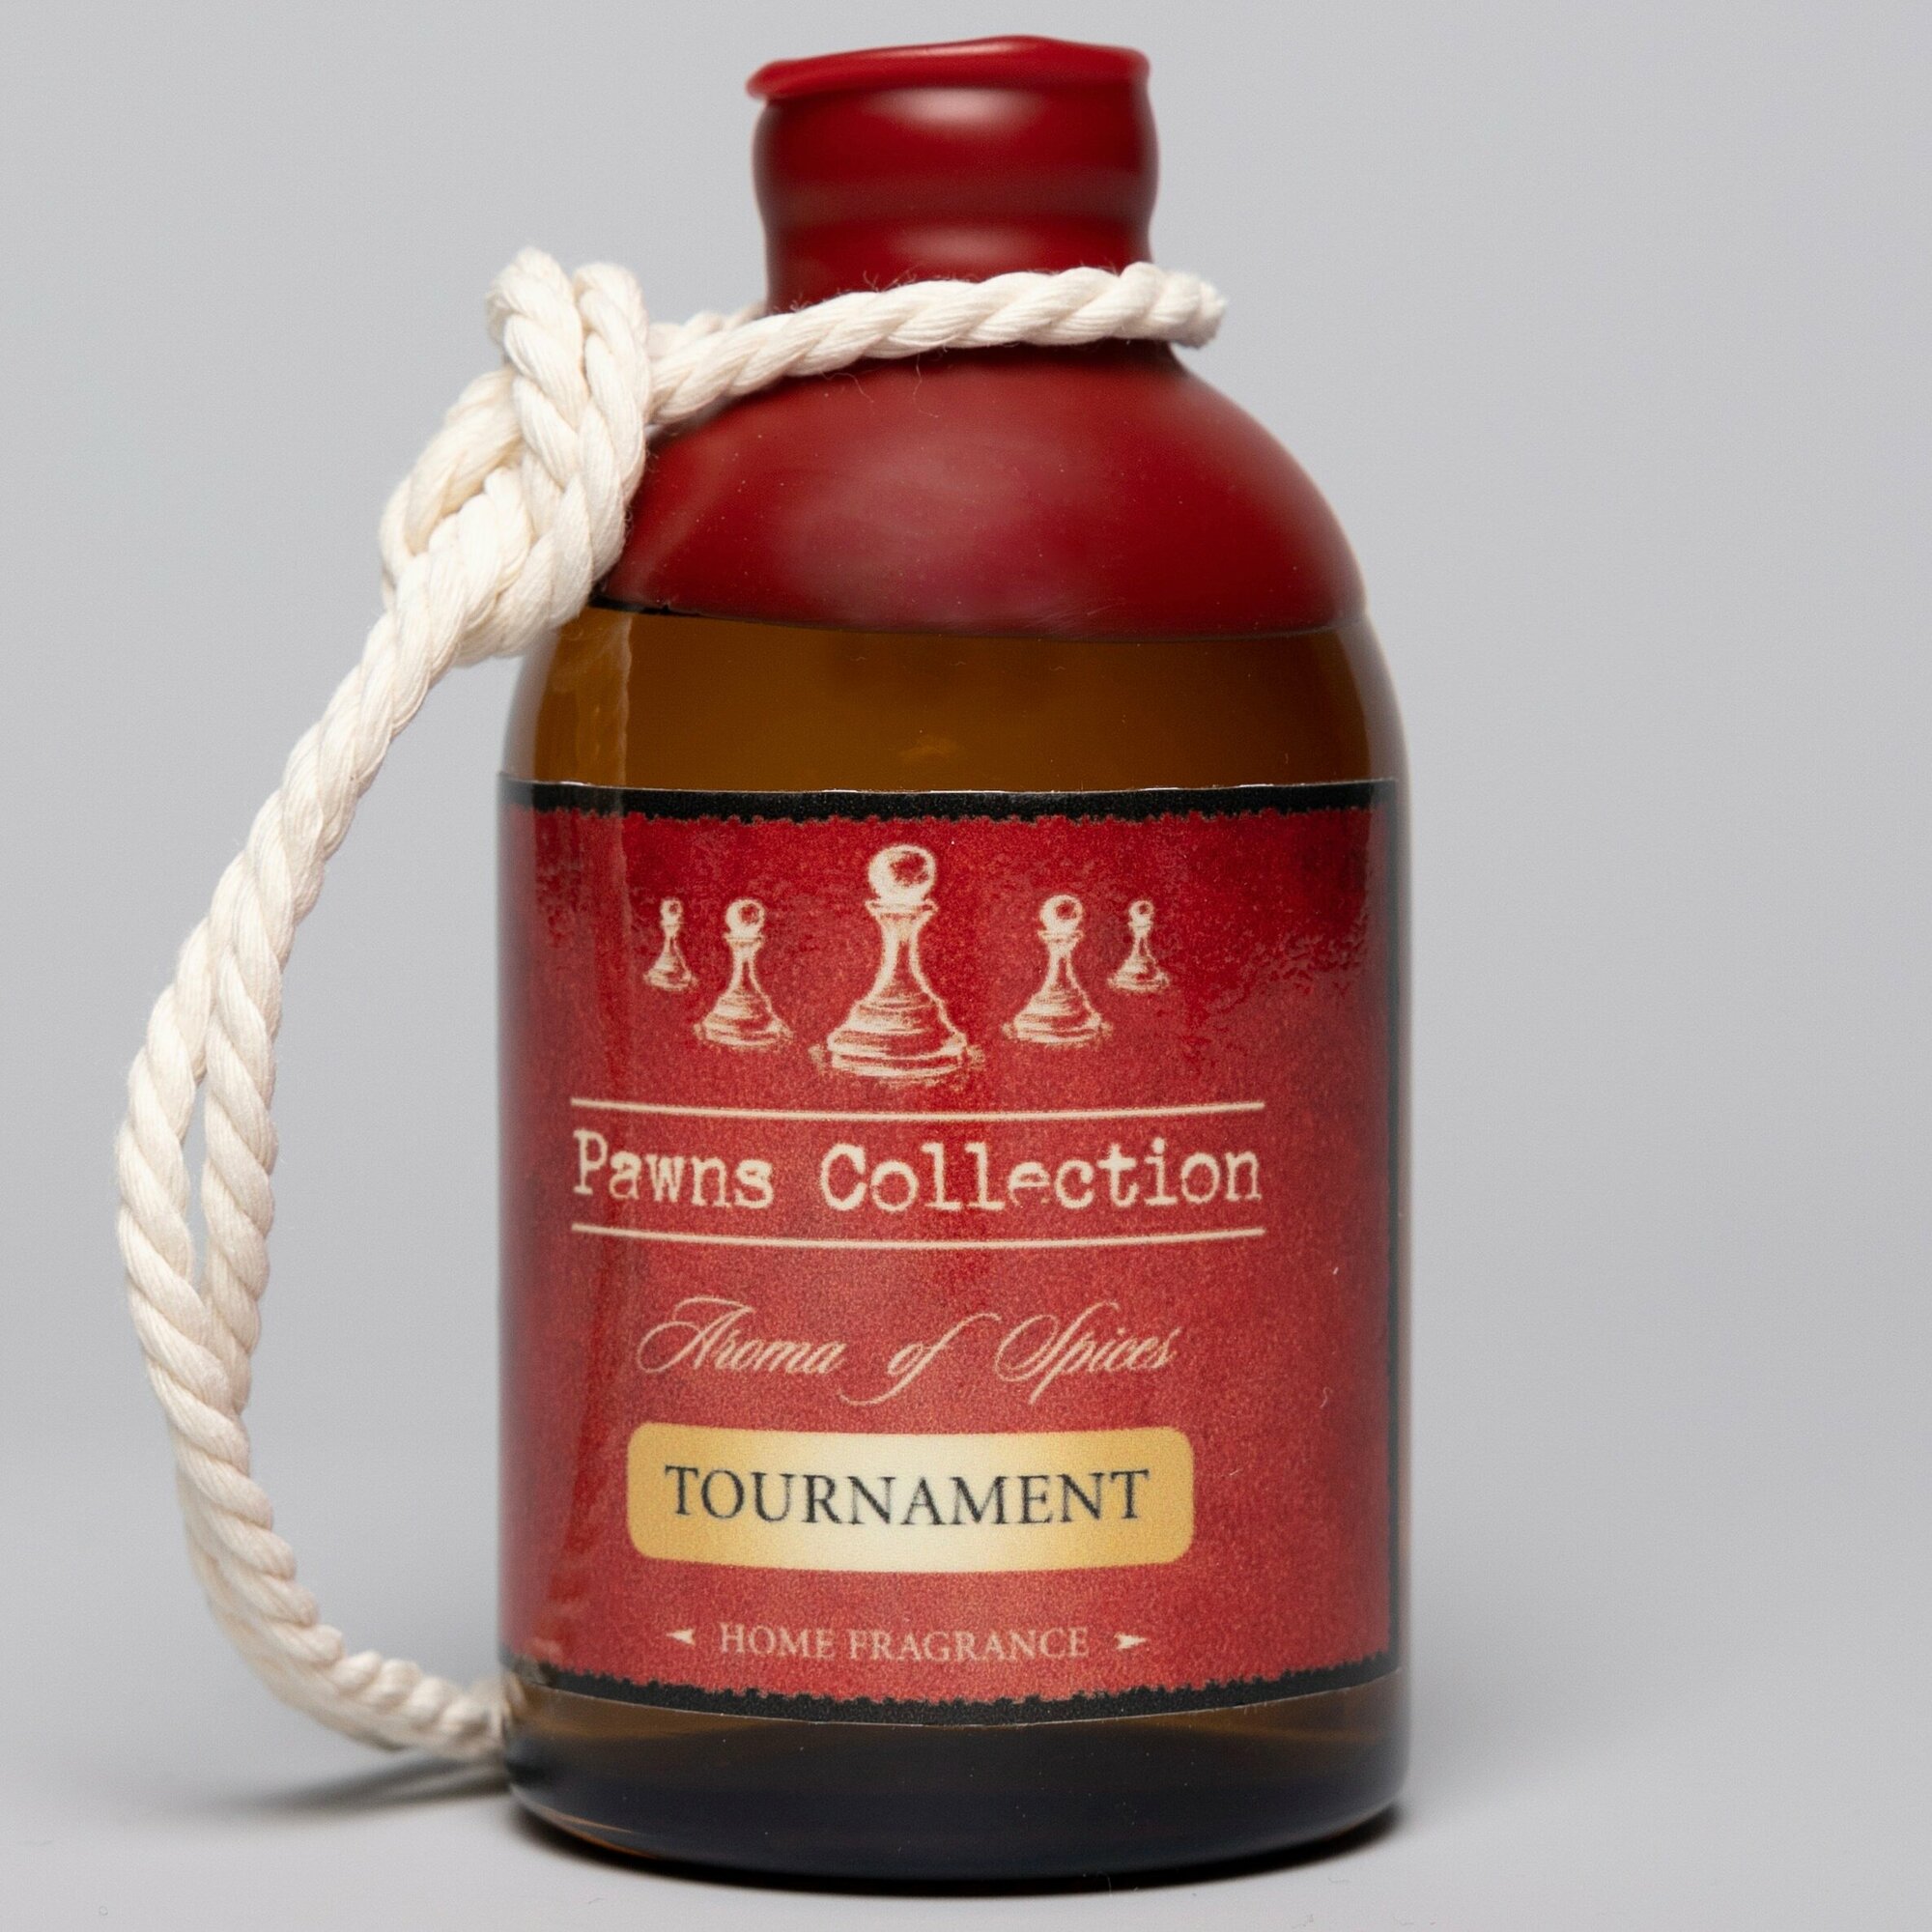 Аромадиффузор Pawns Collection Aroma of Spices